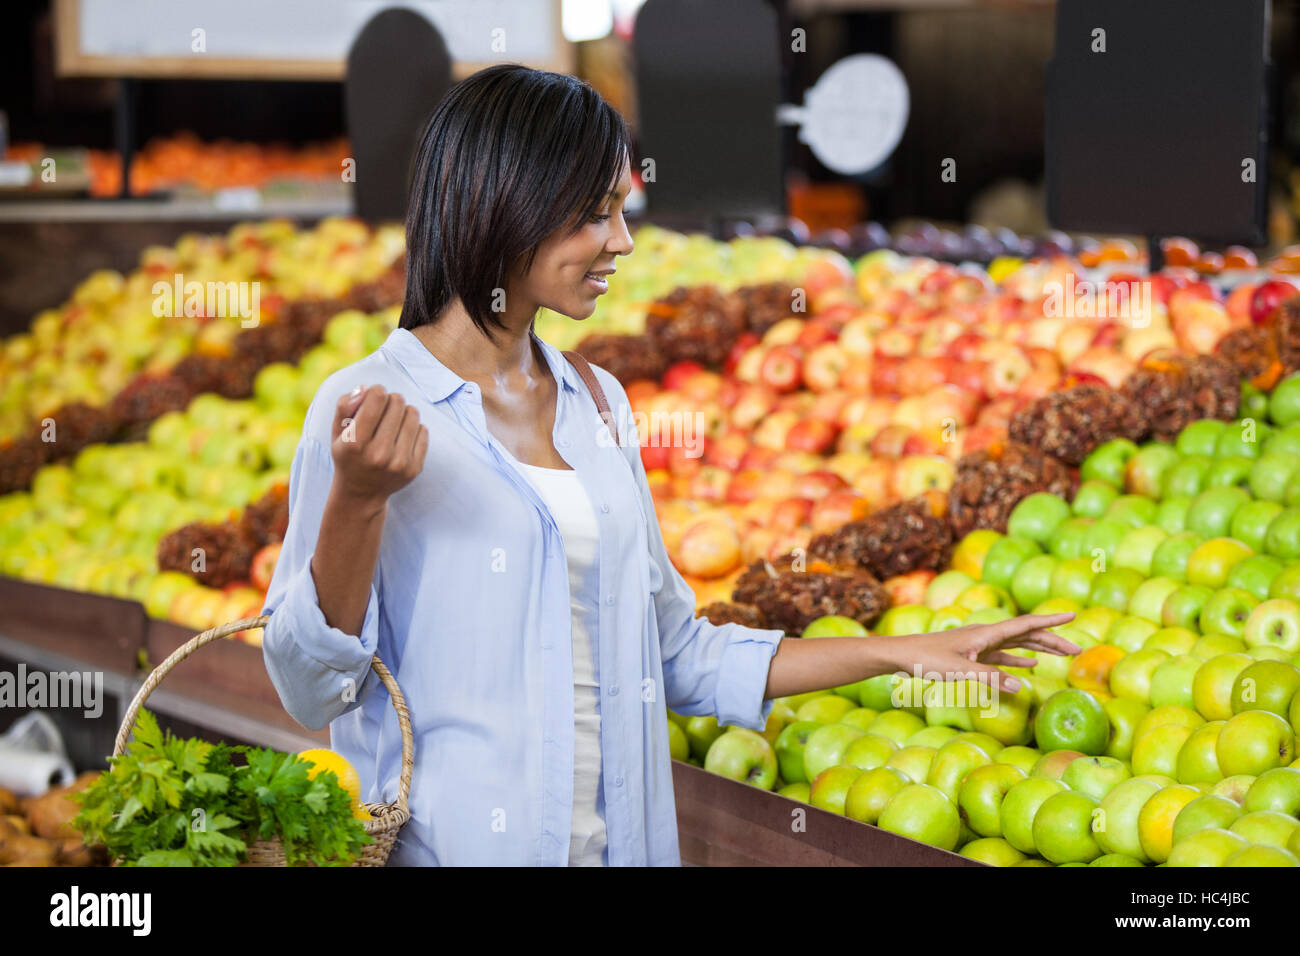 Smiling woman buying fruits in organic section Stock Photo